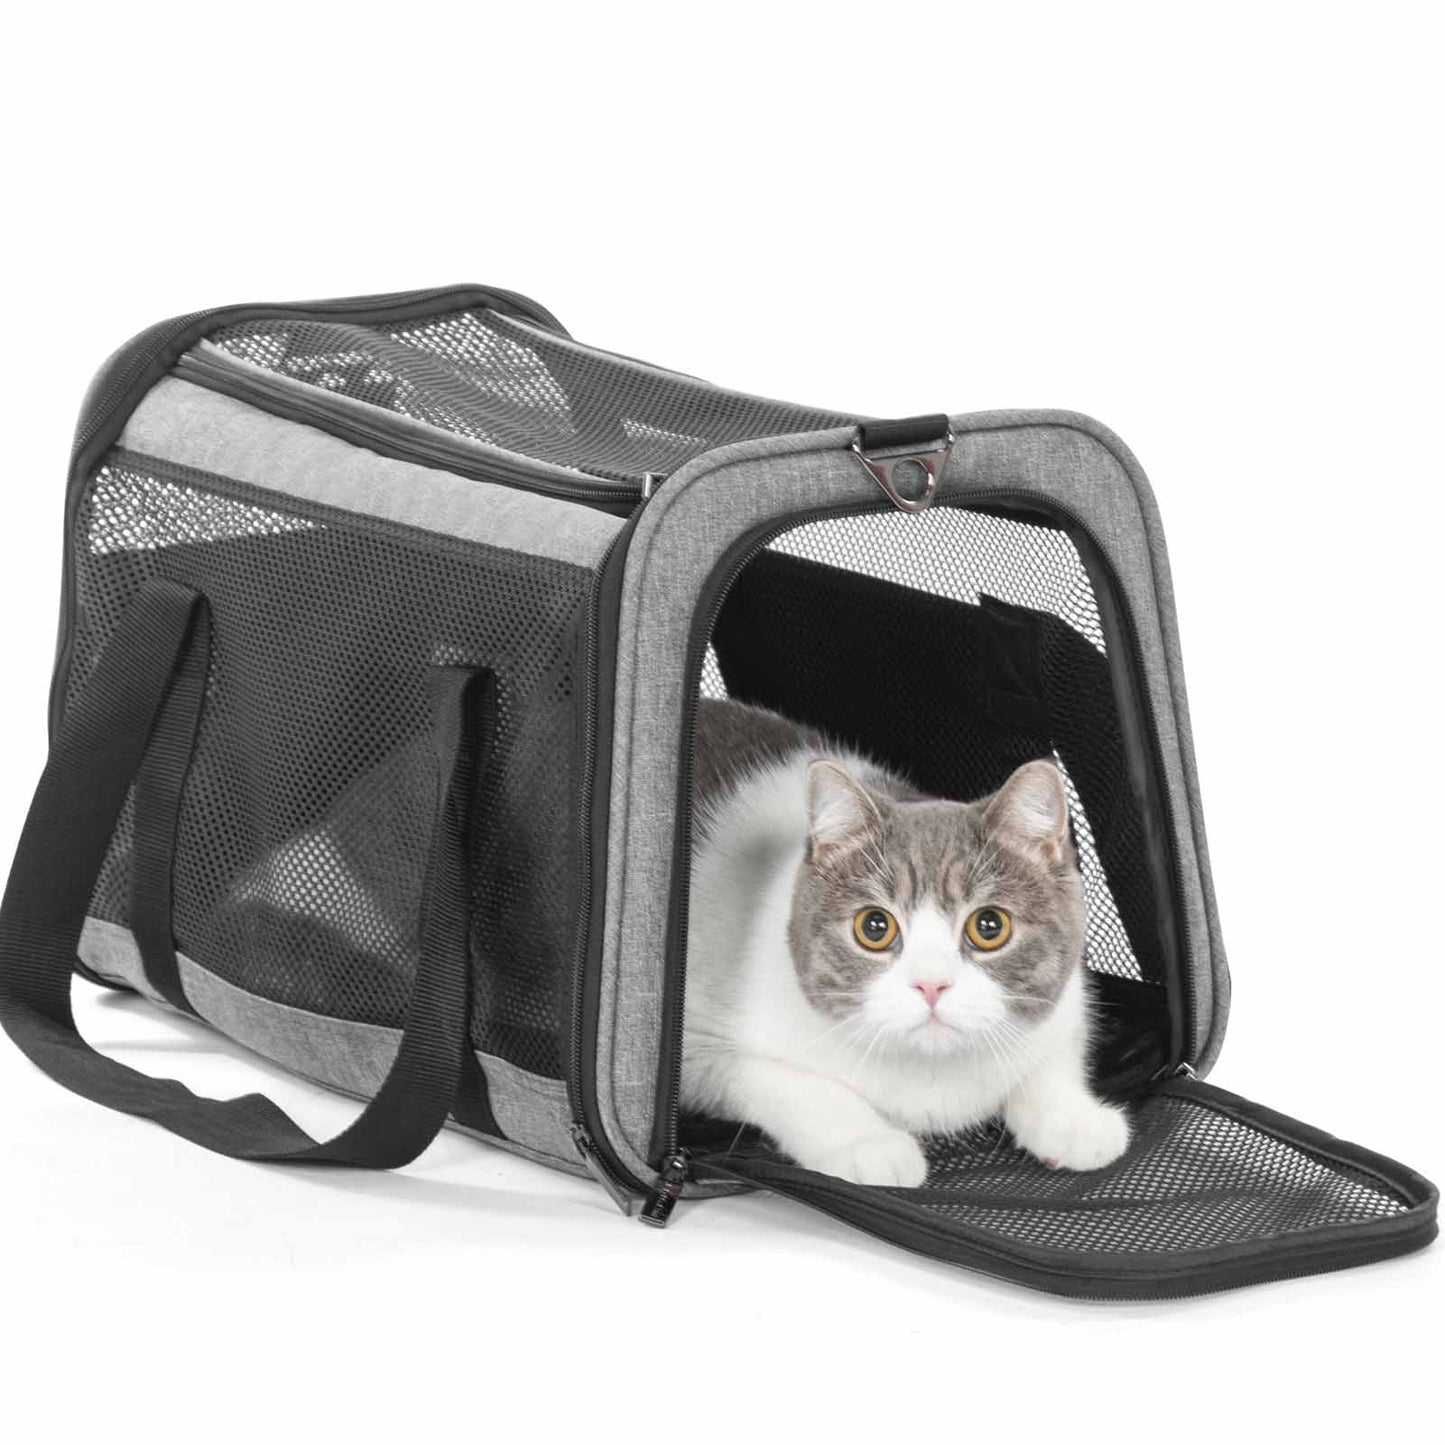  Petsfit Bird Carrier Medium Size with Stainless Steel